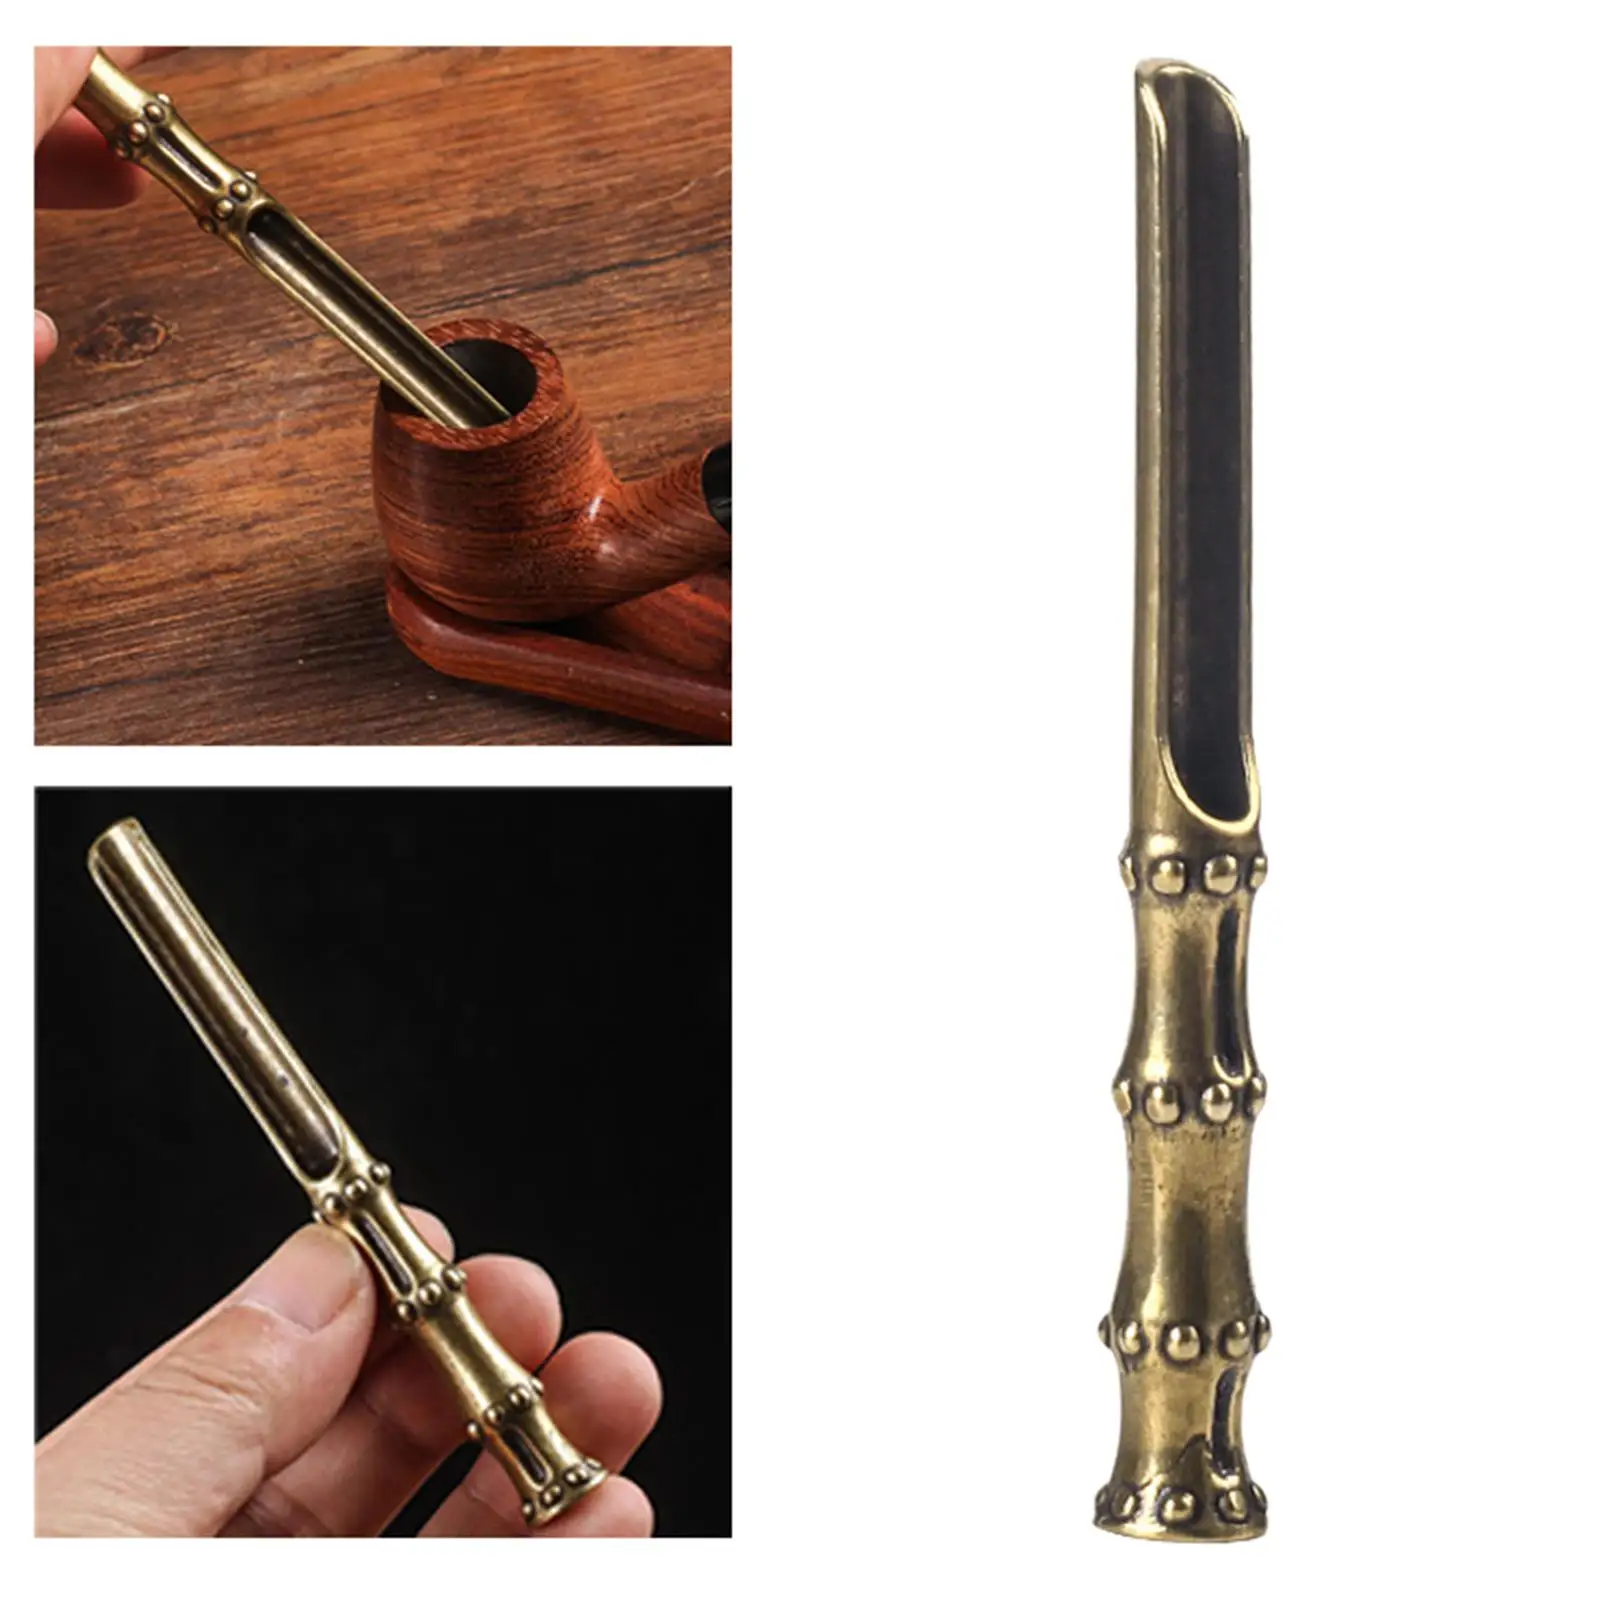 Retro Pipe Pressing Rod, Cigarette Accessories Copper Carving Multifunctional Solid Grinding Cigarette Press, Beginner Smoker